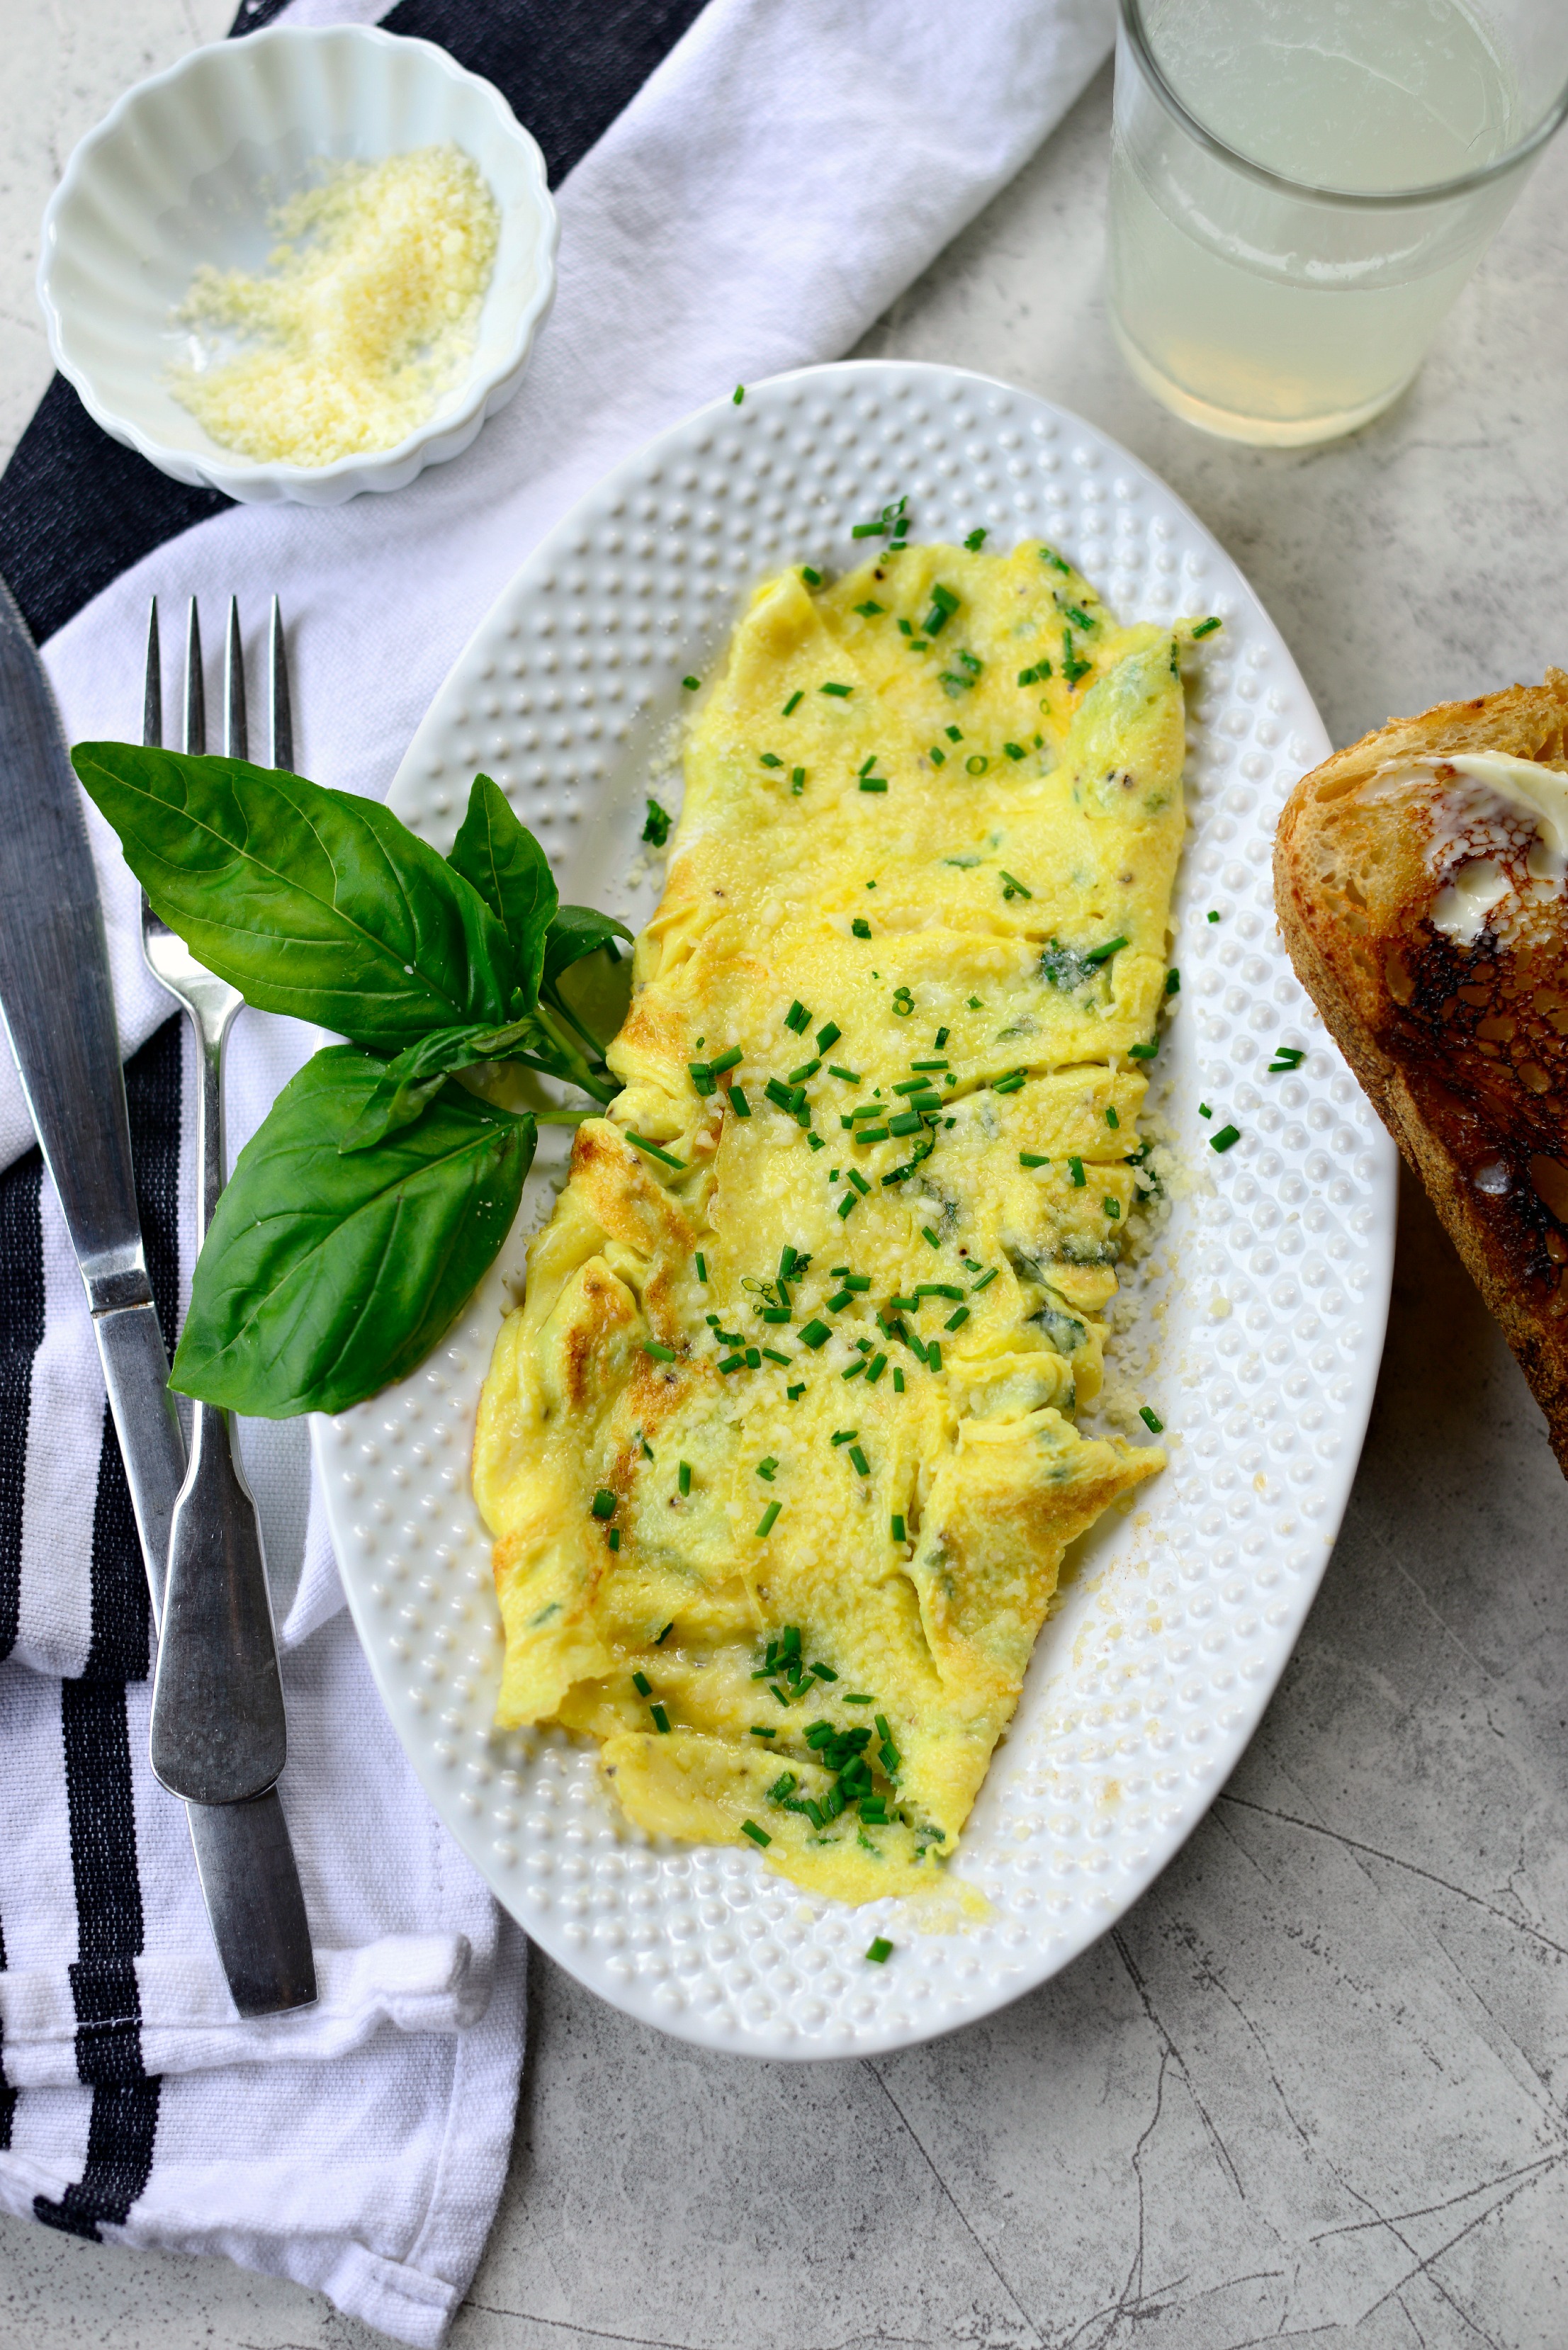 Simply Scratch Parmesan Herb Omelet - Simply Scratch